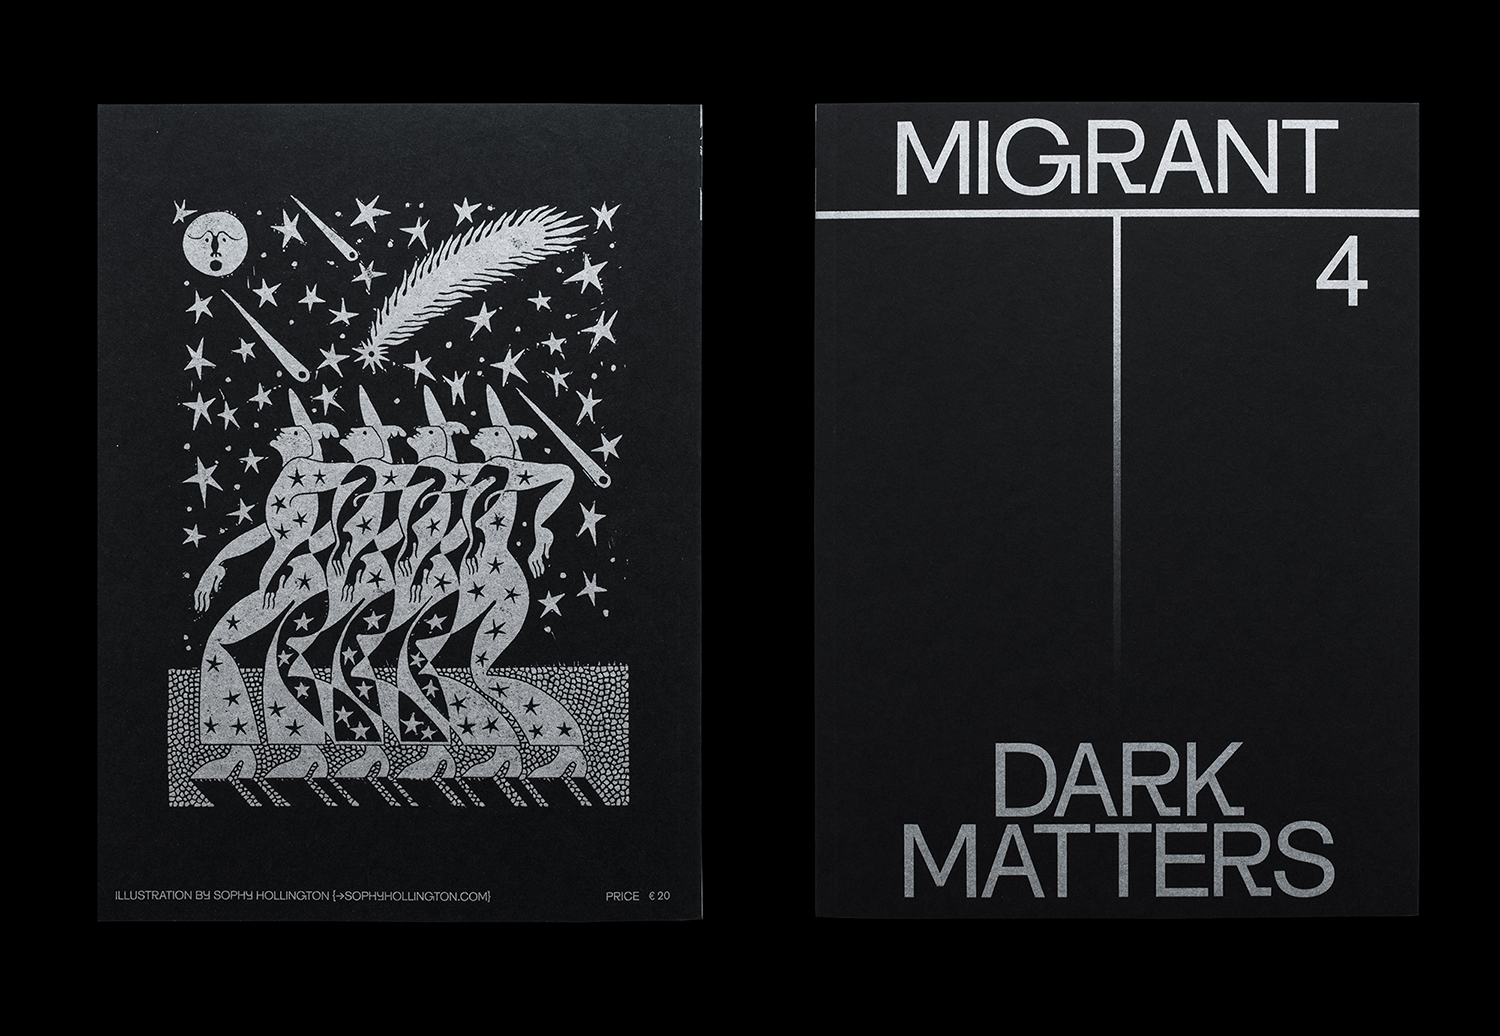 Migrant Journal designed by Offshore Studio